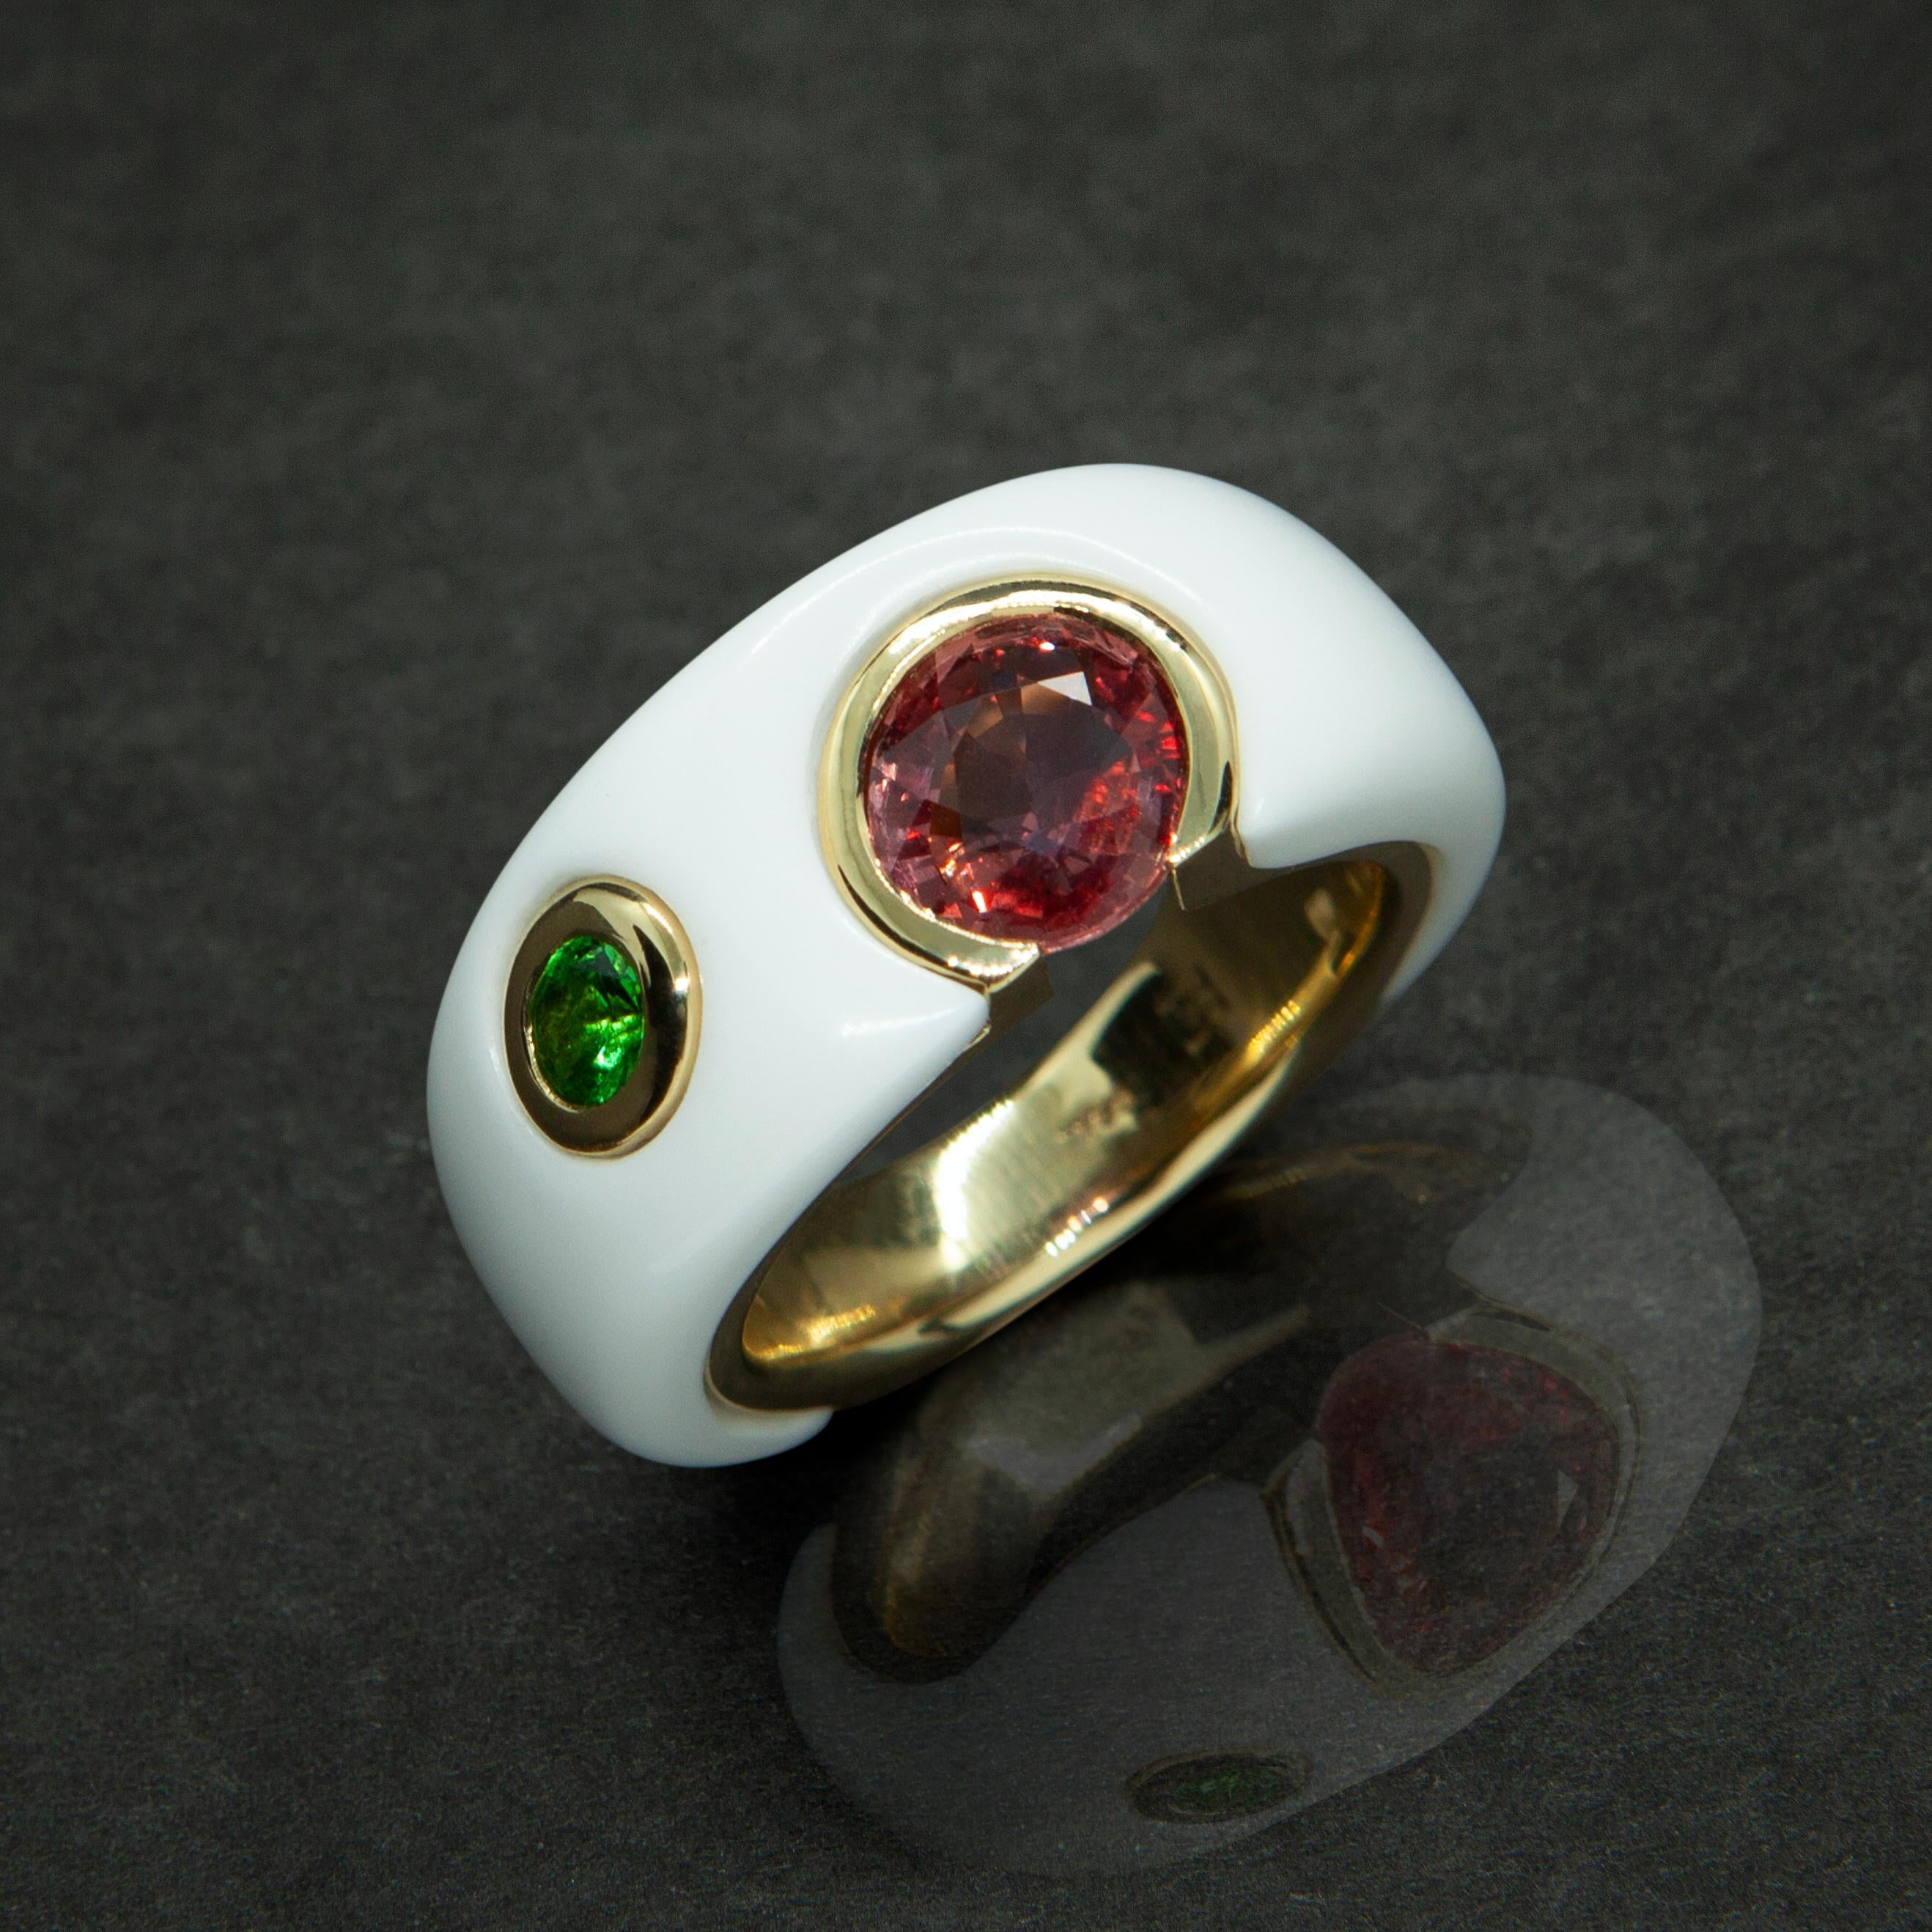 This one of a kind ring is from Lingjun's 'MERGE' collection, featuring a padparadscha sapphire and tsavorite garnet in 18K yellow gold and Corian.
IMPORTANT: Each ring is made to order, due to gemstones' variability, the gem's colour, size and